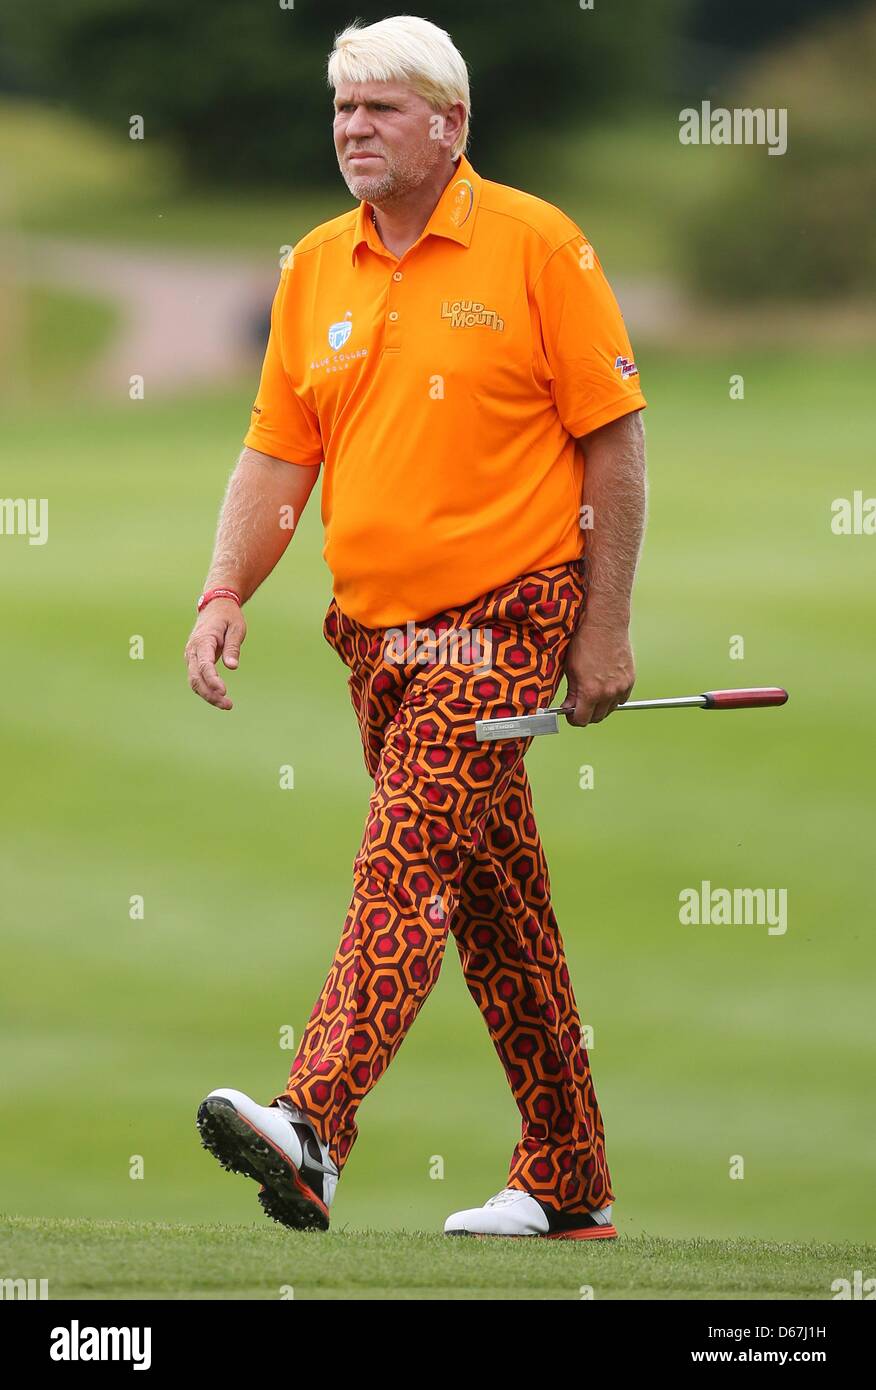 US golfer John Daly wears extravagant trousers during the International  open at golf club Gut Laerchenhof in Pulheim near Cologne, Germany, 21 June  2012. World class golfers of the European Tour compete